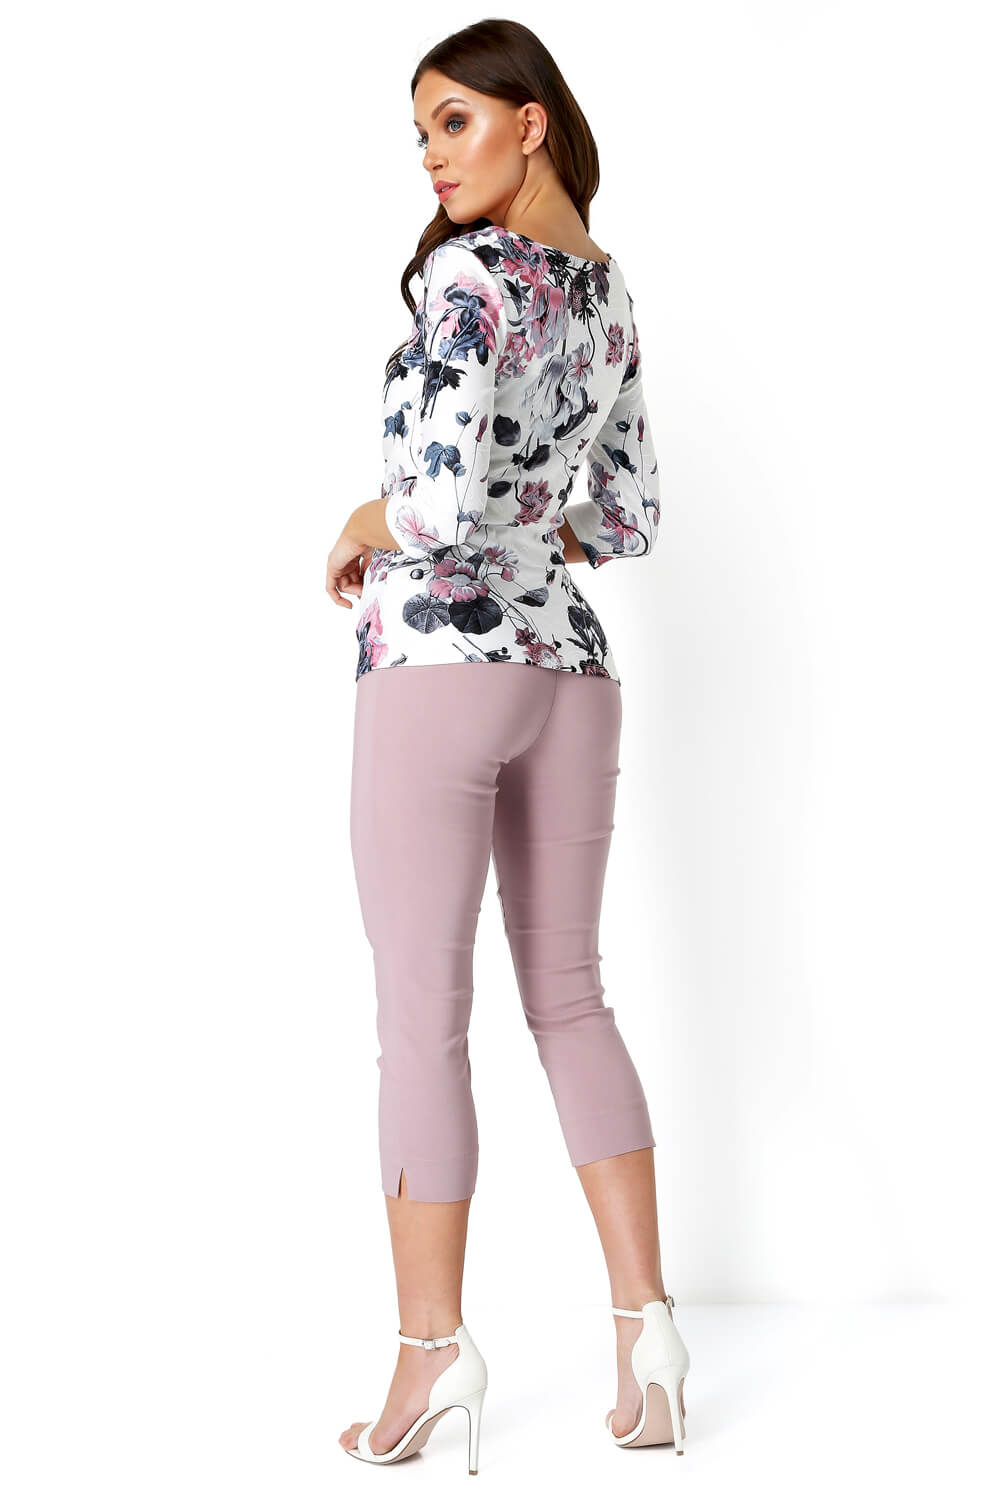 PINK Floral Cowl Neck Top, Image 3 of 4